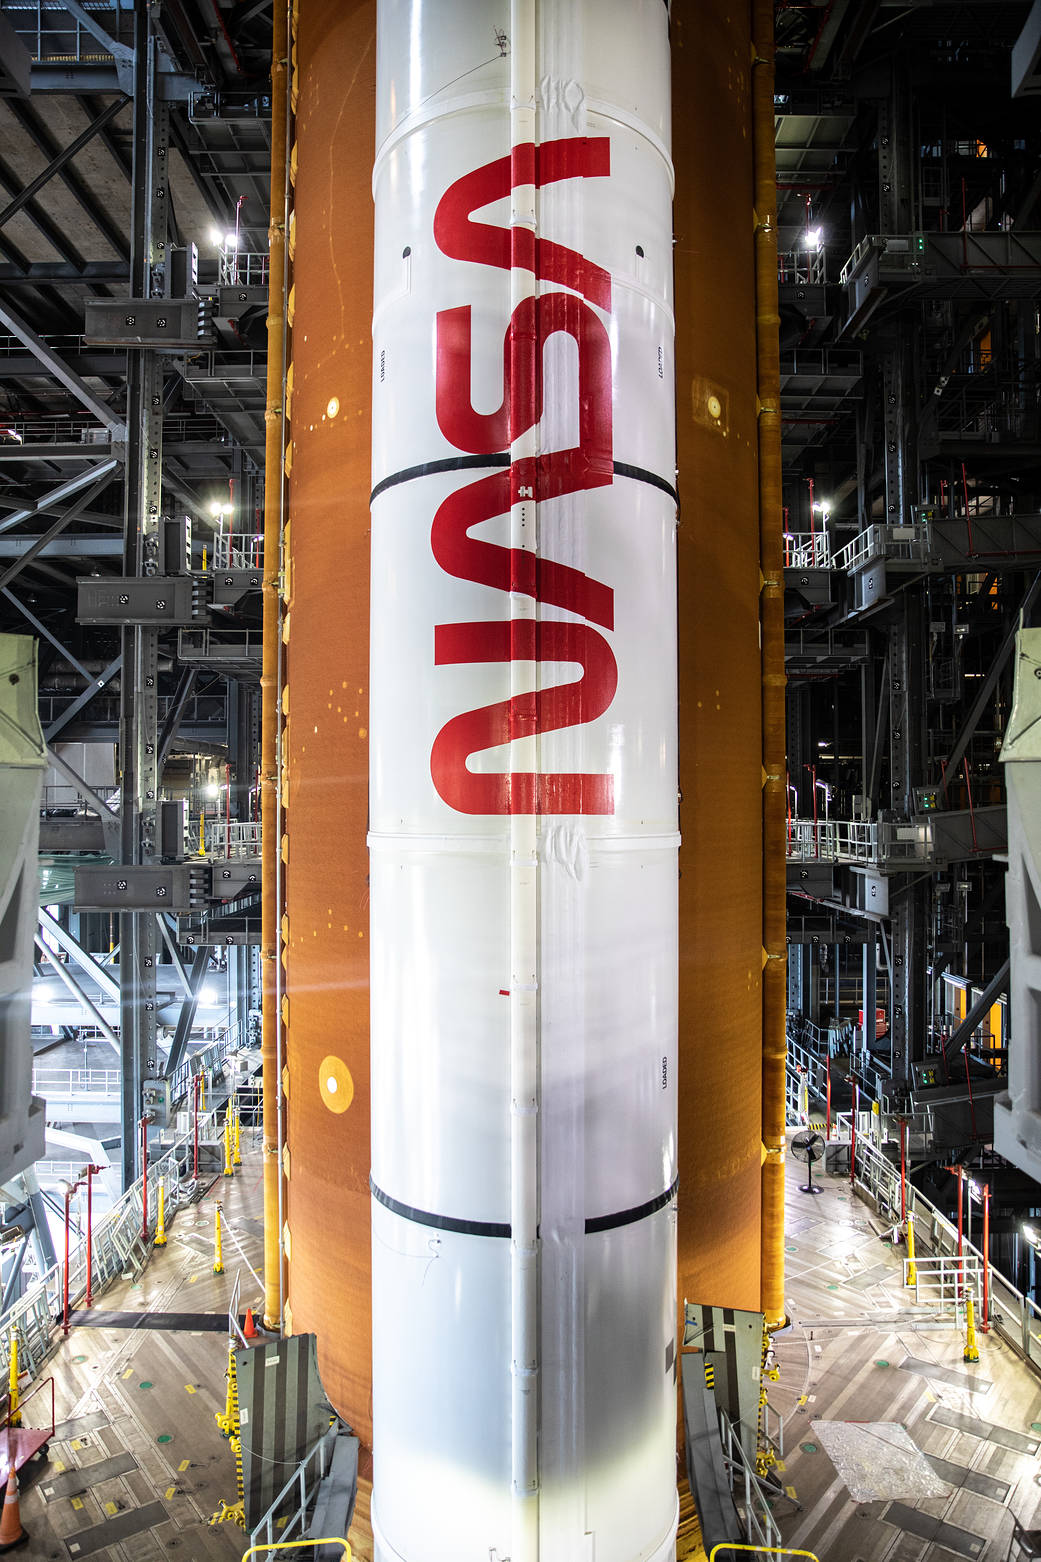 Inside High Bay 3 of the Vehicle Assembly Building at NASA’s Kennedy Space Center in Florida, application of the NASA worm logo is complete on the first of two solid rocket boosters for the Artemis I Space Launch System on March 14, 2022. 